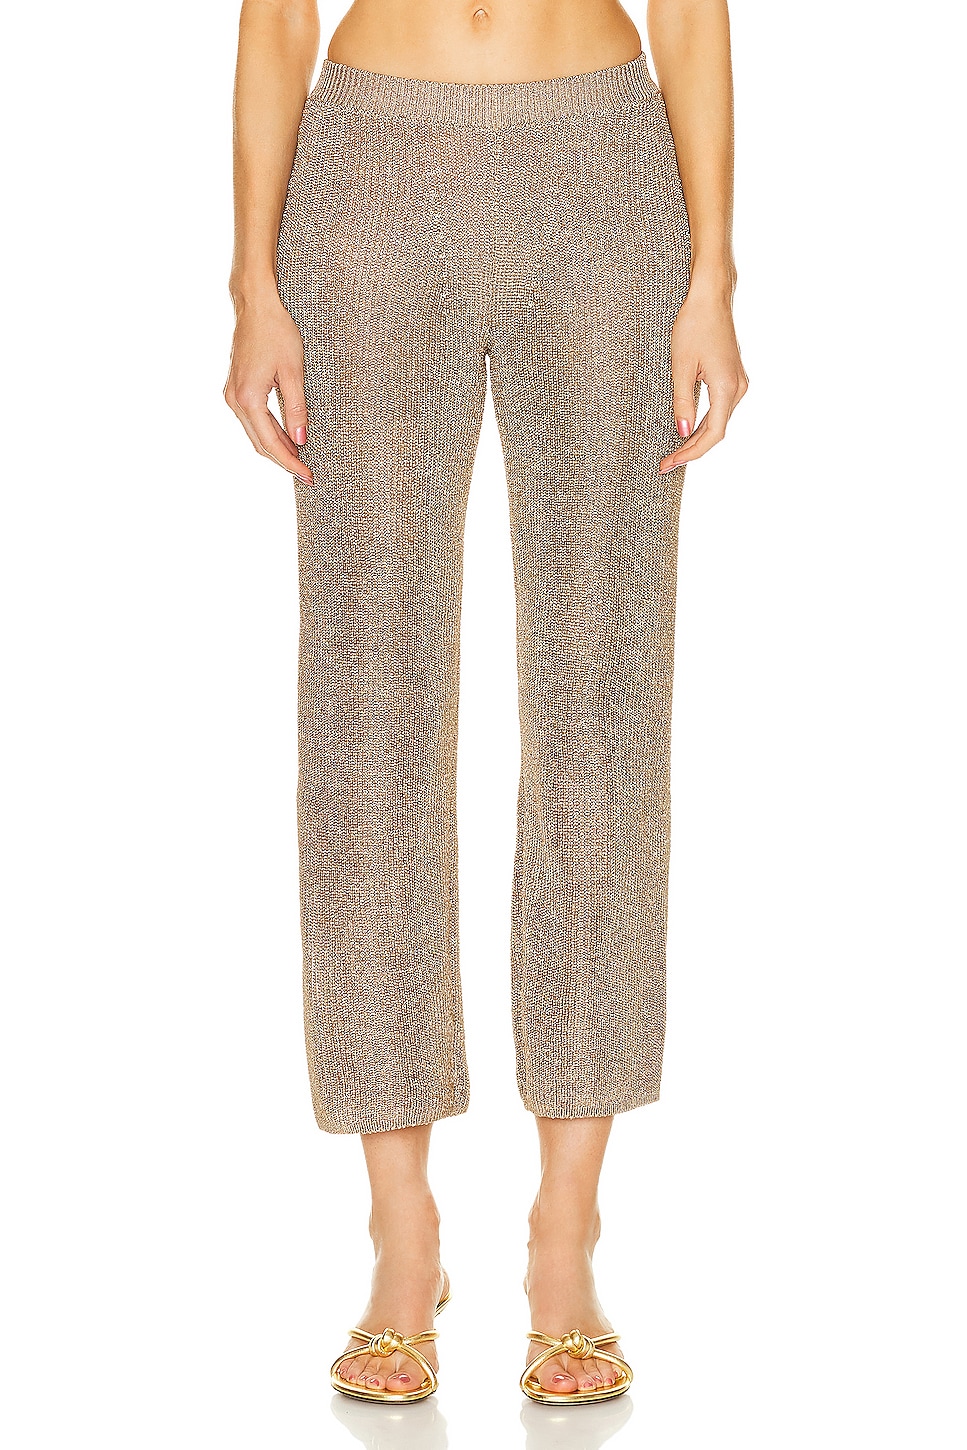 Image 1 of Cult Gaia Lawena Fit To Flare Knit Pant in Champagne